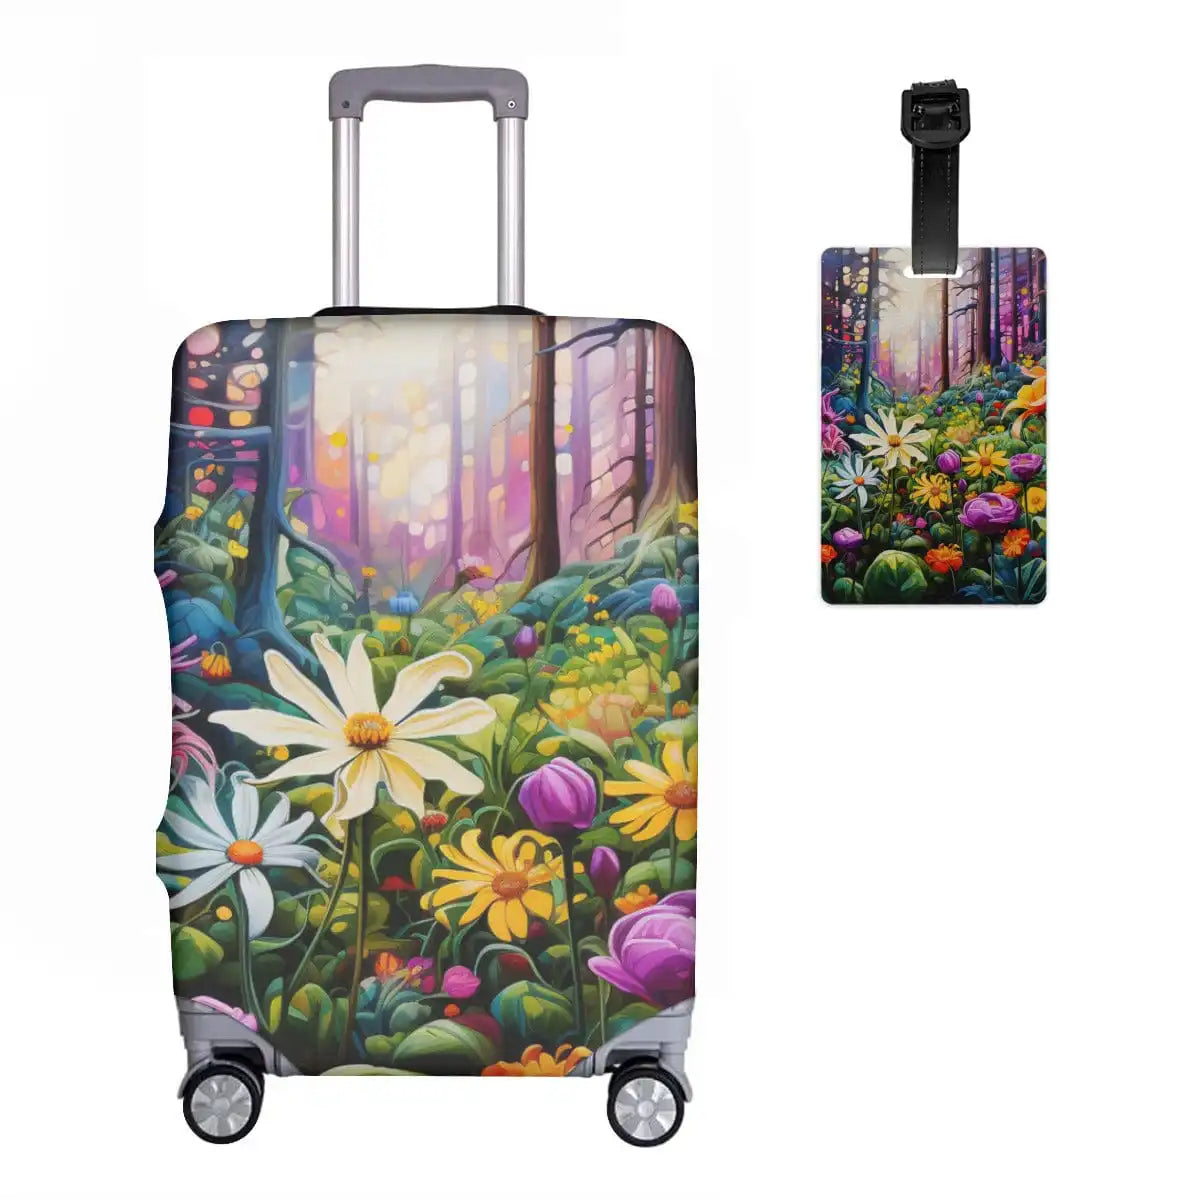 Flower Field Patterned Unisex Luggage Cover and Tag Set